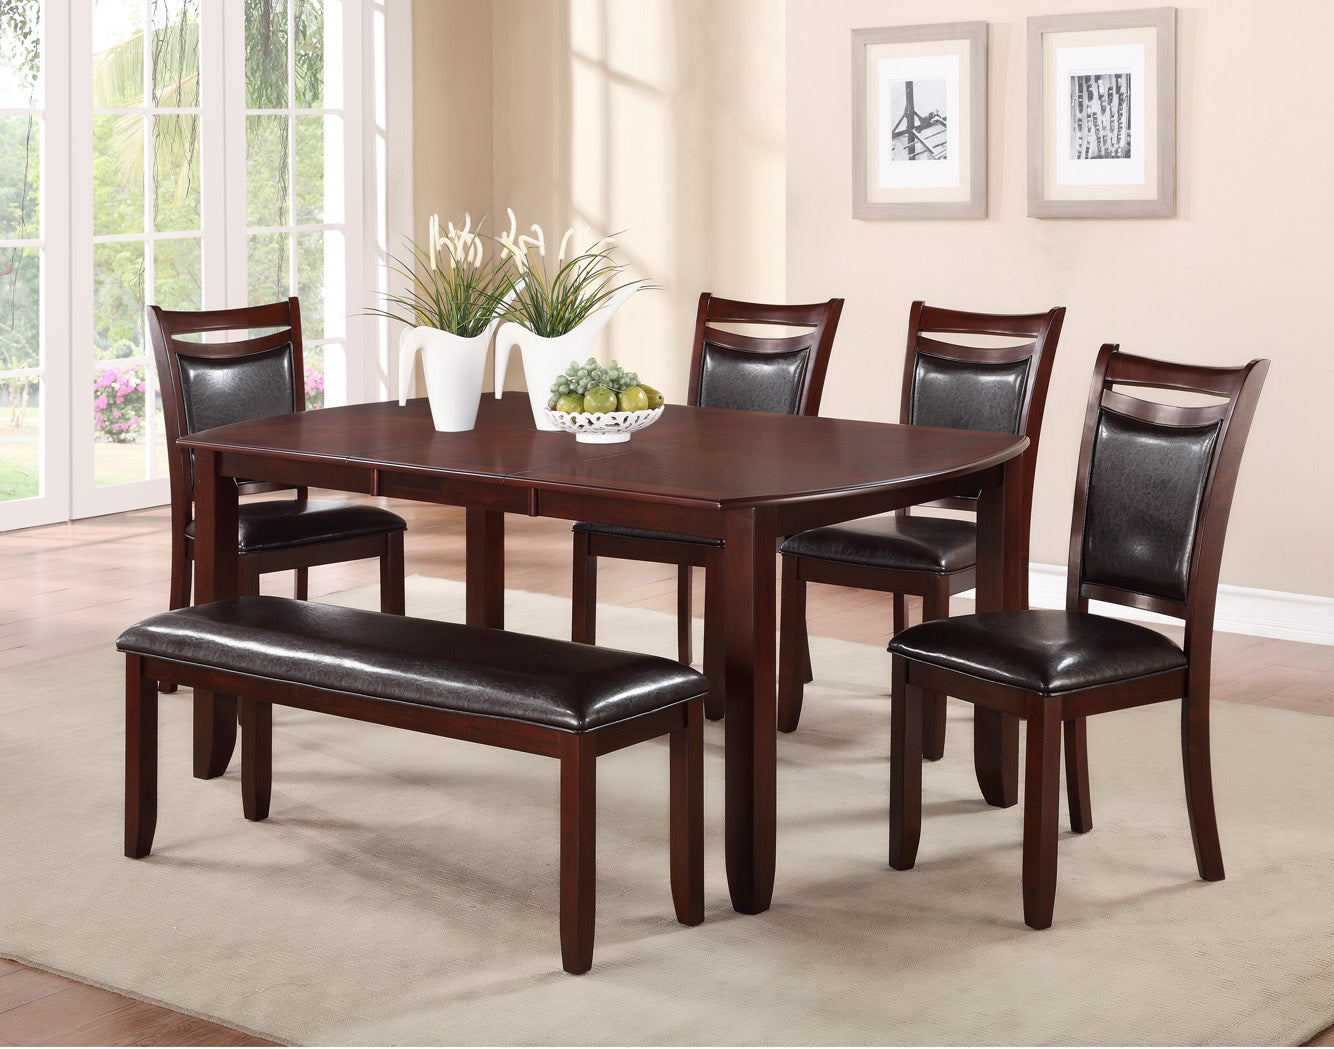 NAV DINING SET WITH LEAF AND BENCH - 6 PC